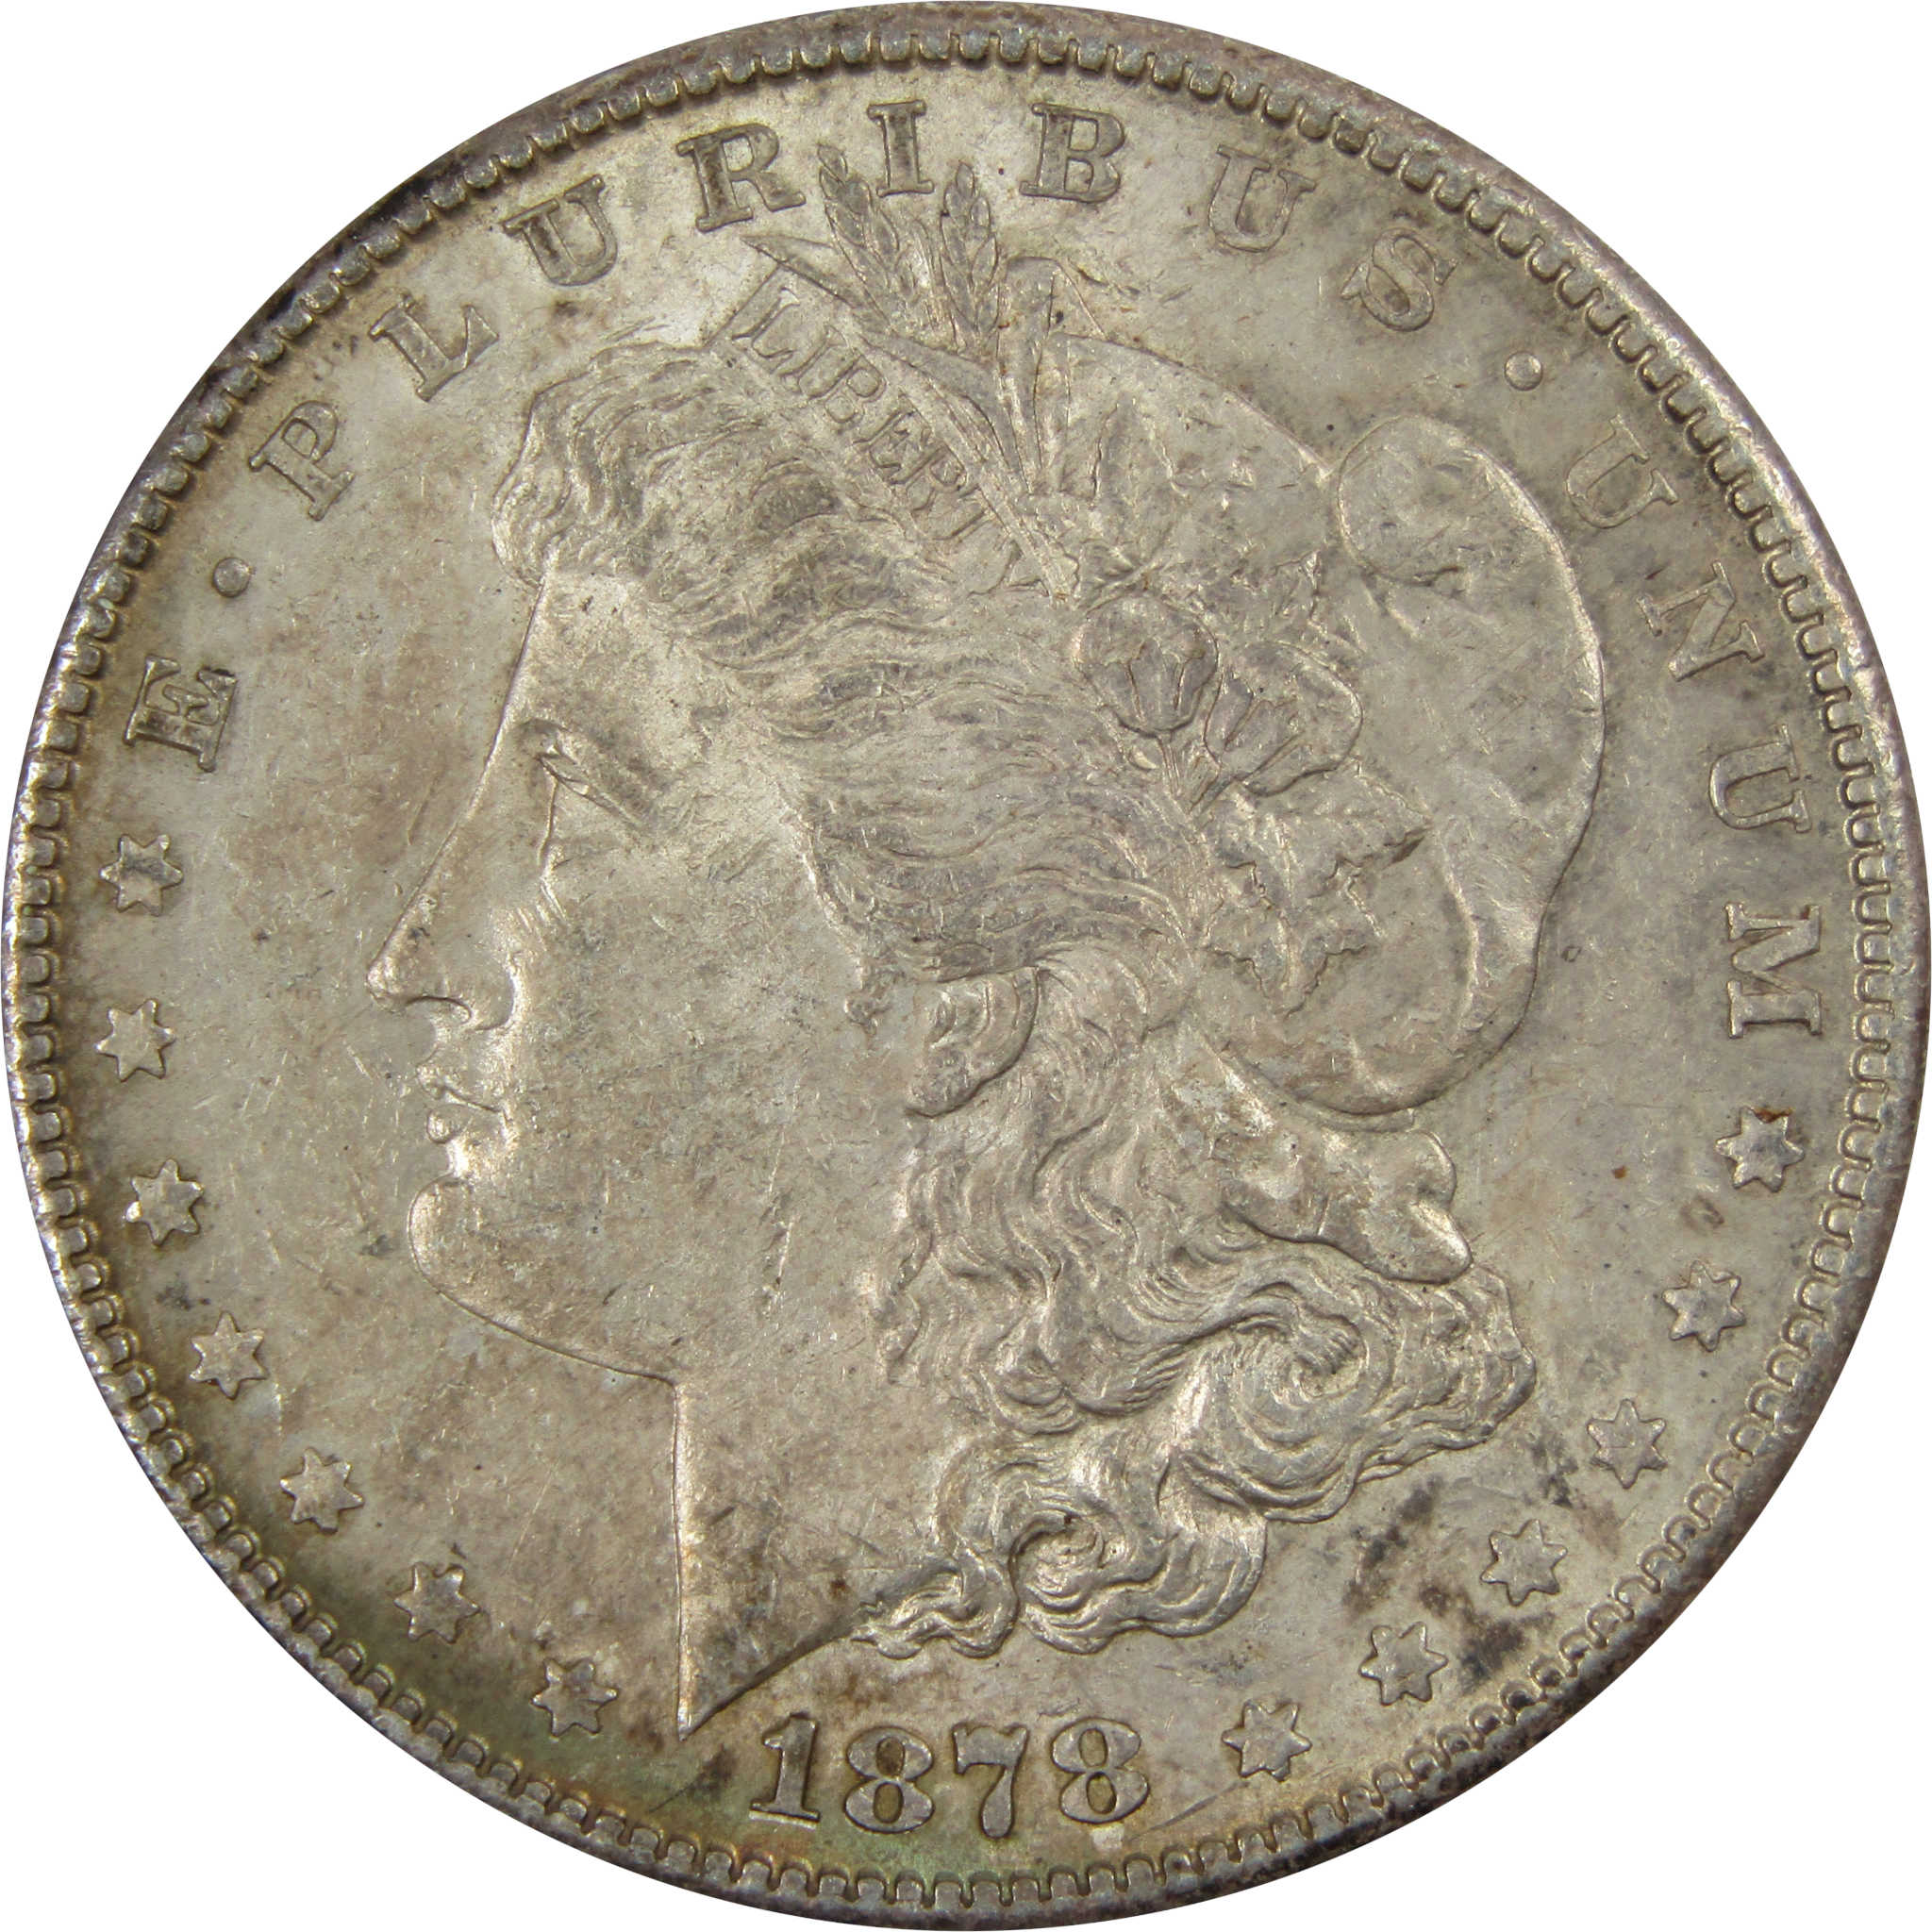 1878 S Morgan Dollar XF EF Extremely Fine 90% Silver $1 Coin SKU:I7001 - Morgan coin - Morgan silver dollar - Morgan silver dollar for sale - Profile Coins &amp; Collectibles